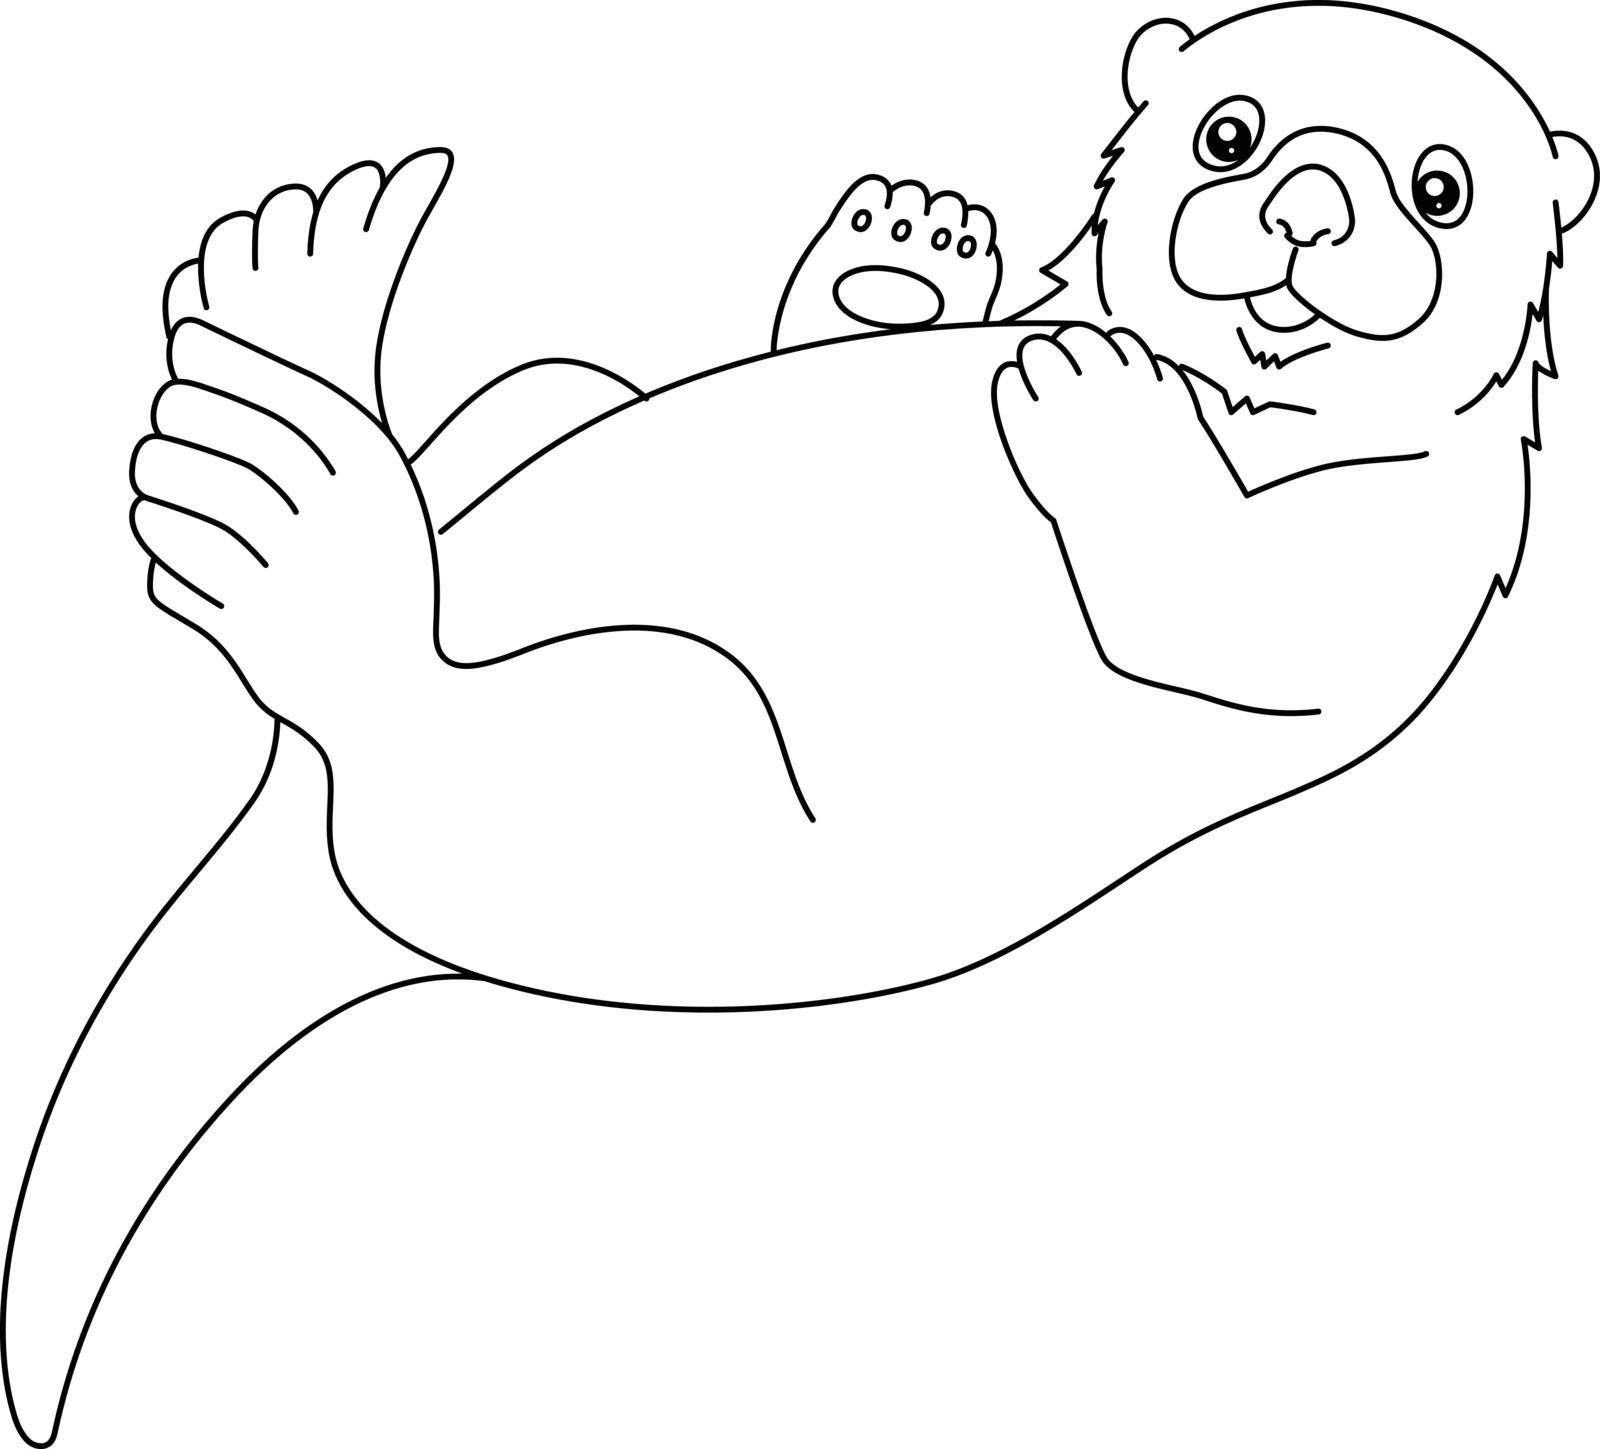 Sea otter Coloring Page Isolated for Kids by abbydesign